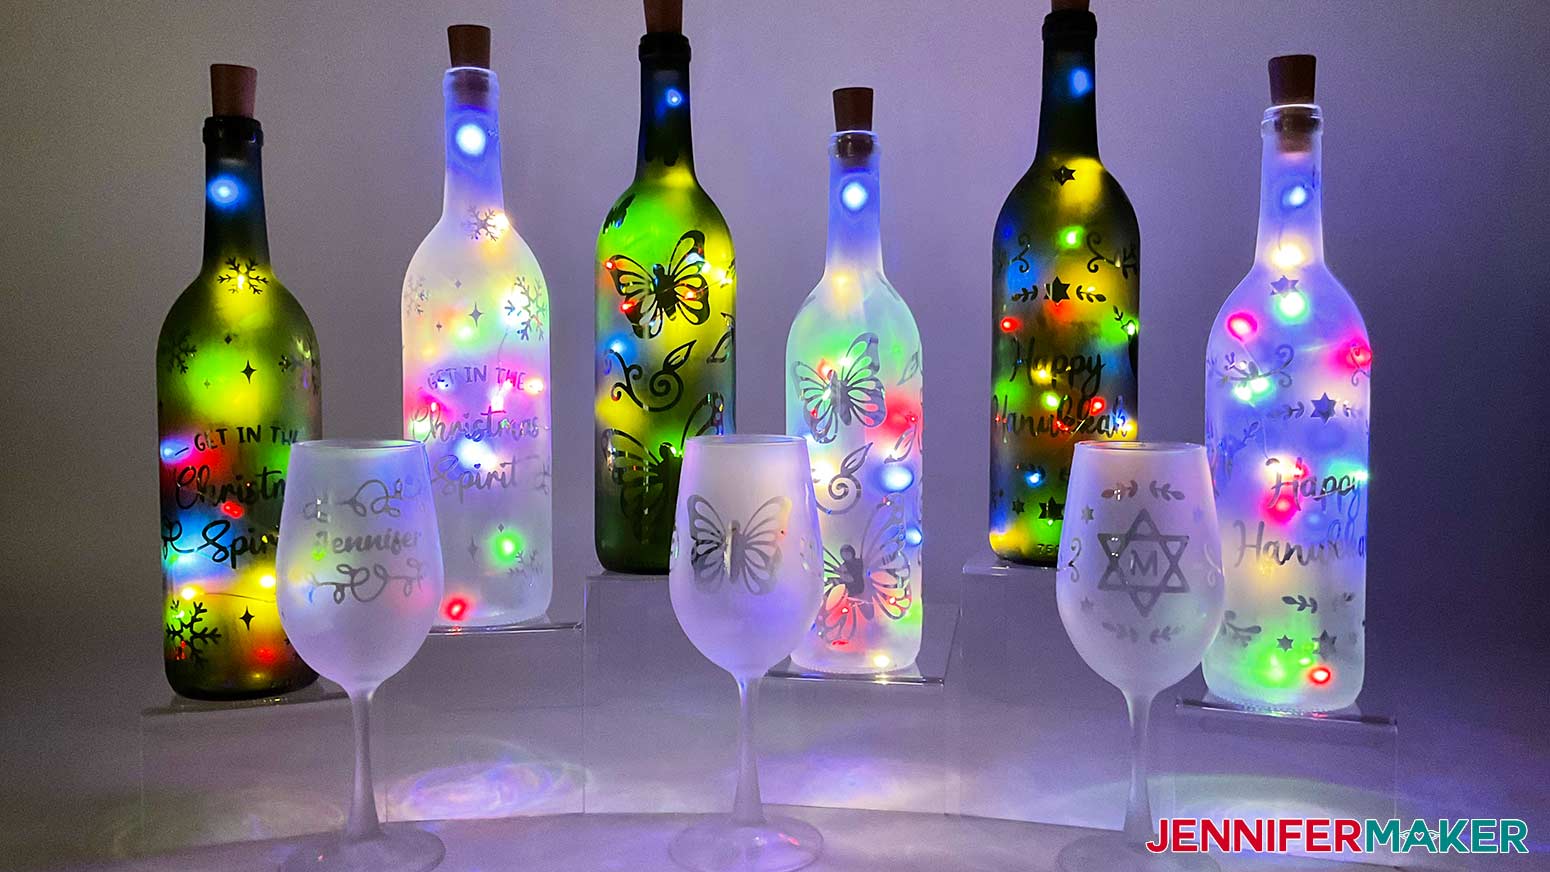 Etched wine glasses and bottles with Christmas, butterfly, and Hanukkah designs reverse etched onto them